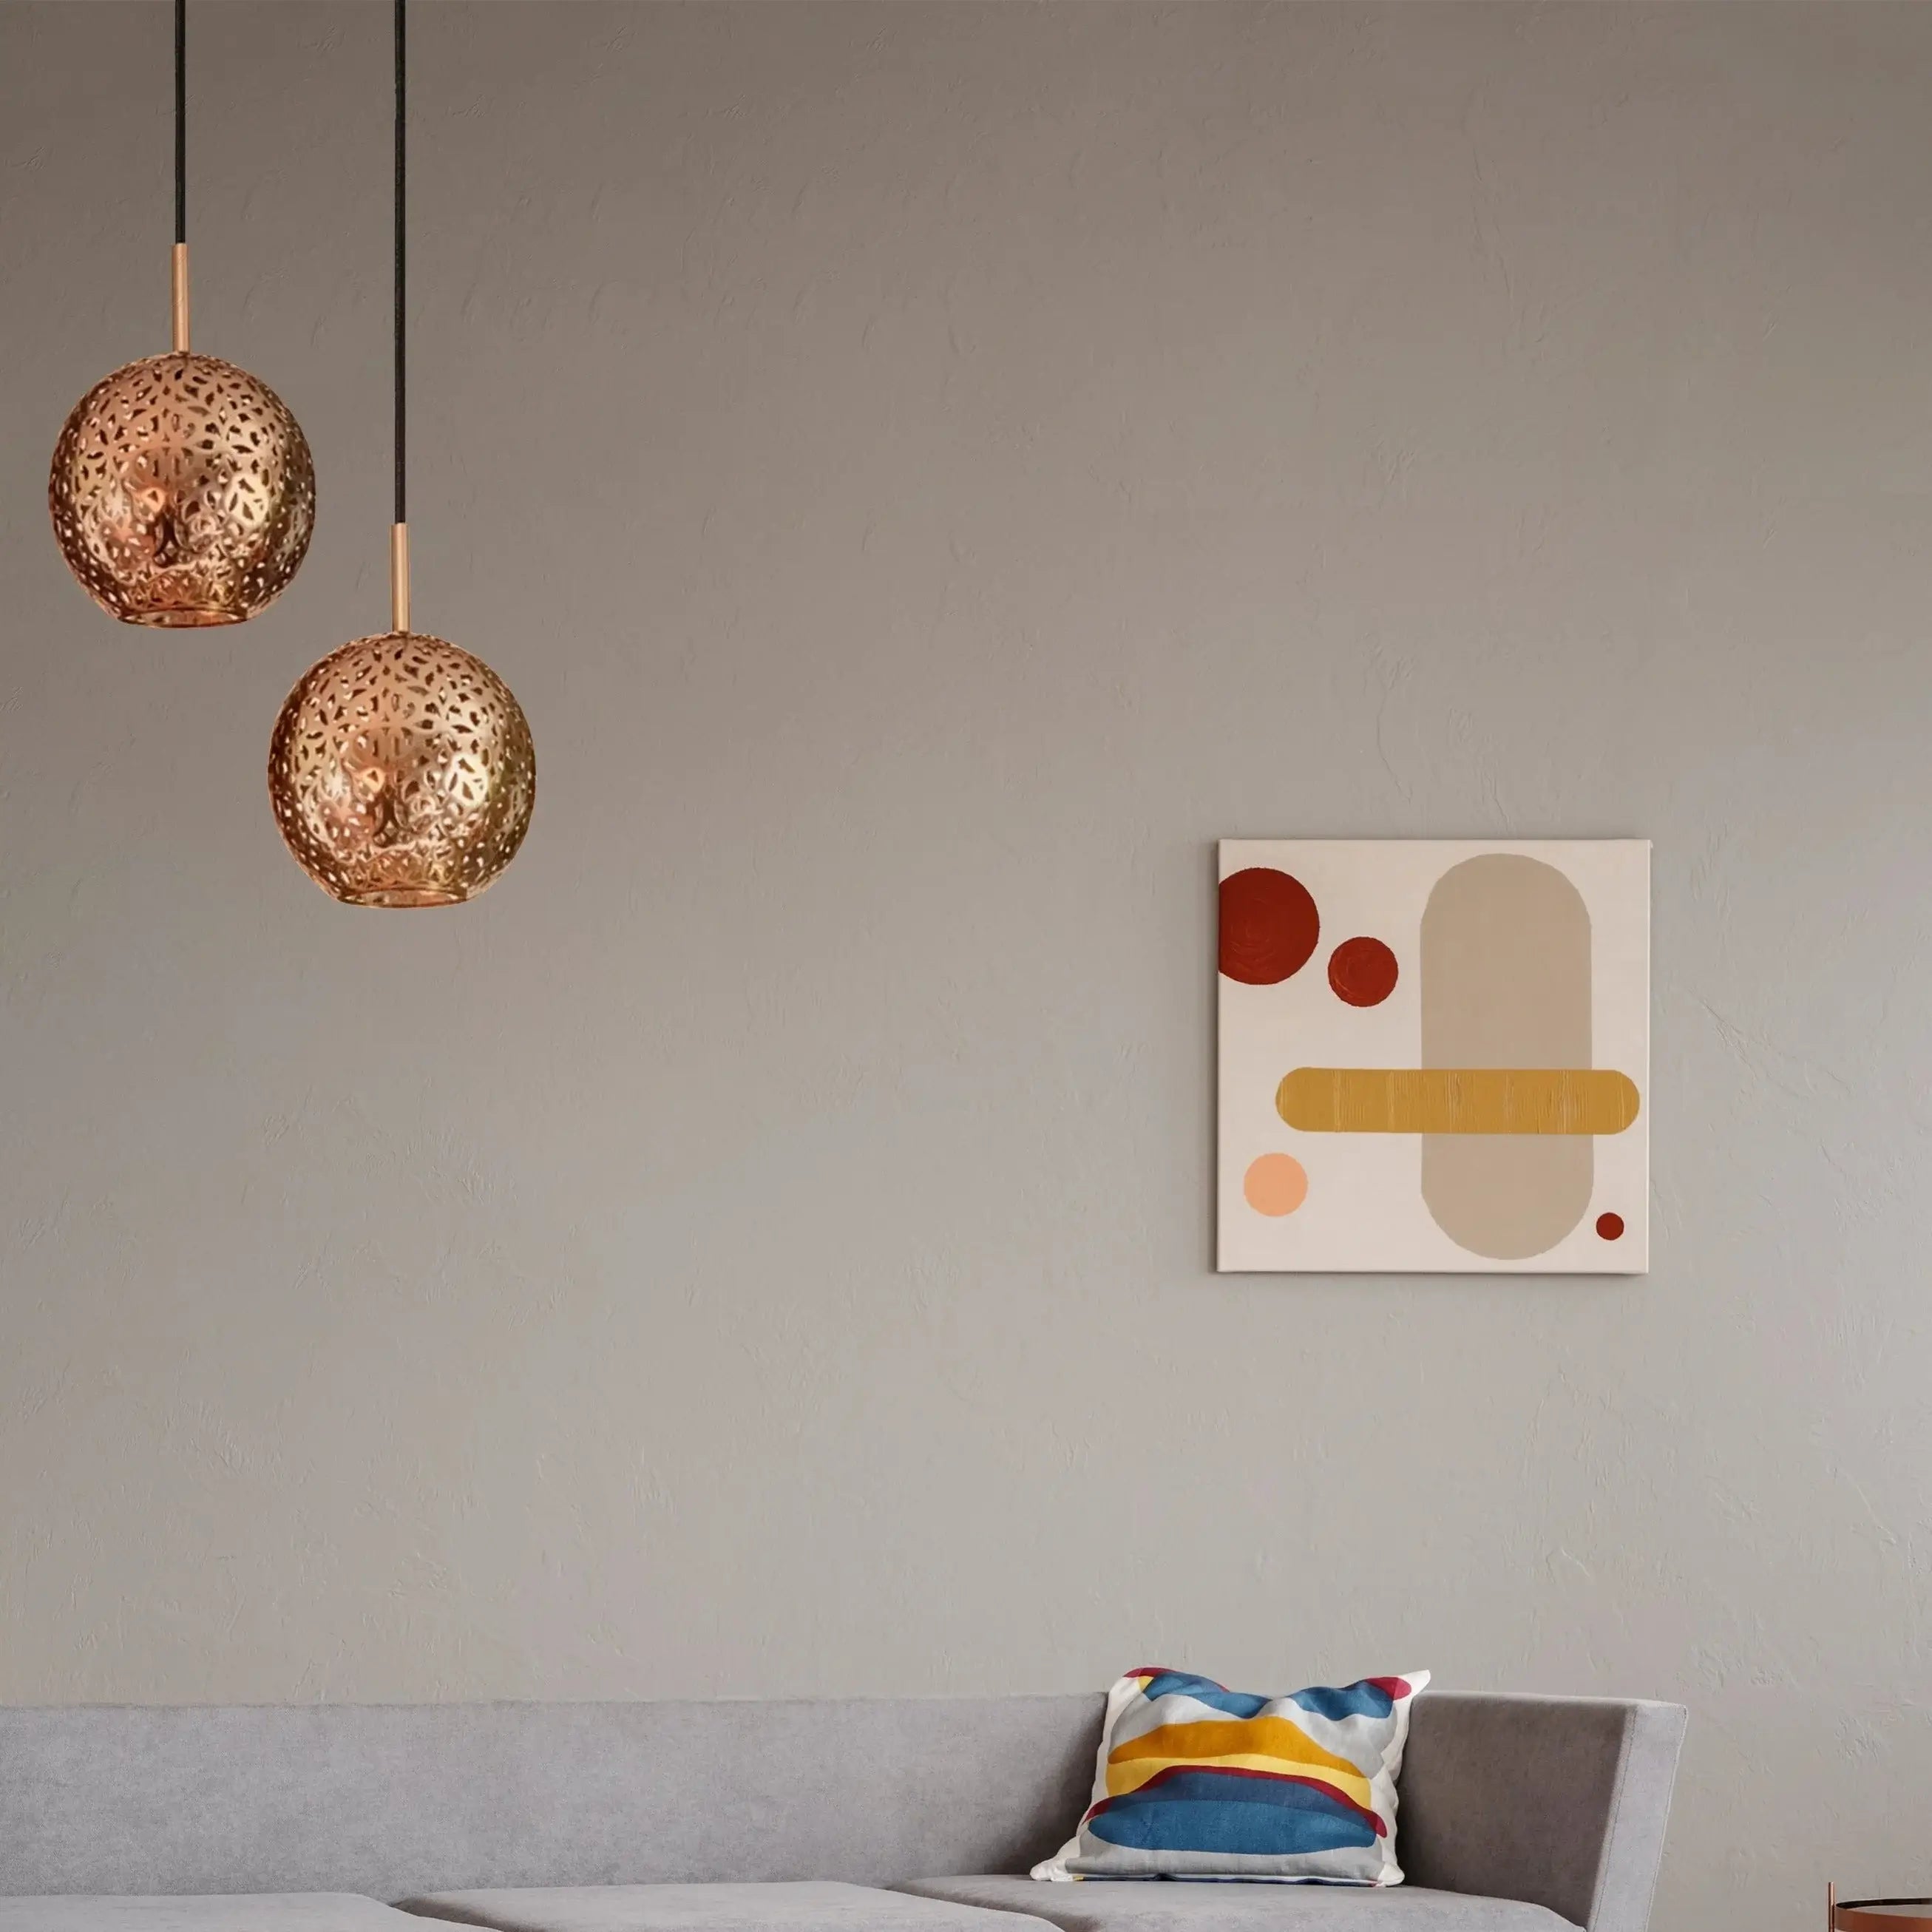 Dounia home Pendant light in Polished brass  made of Metal,  used as a living room lighting, Model: Riad  single